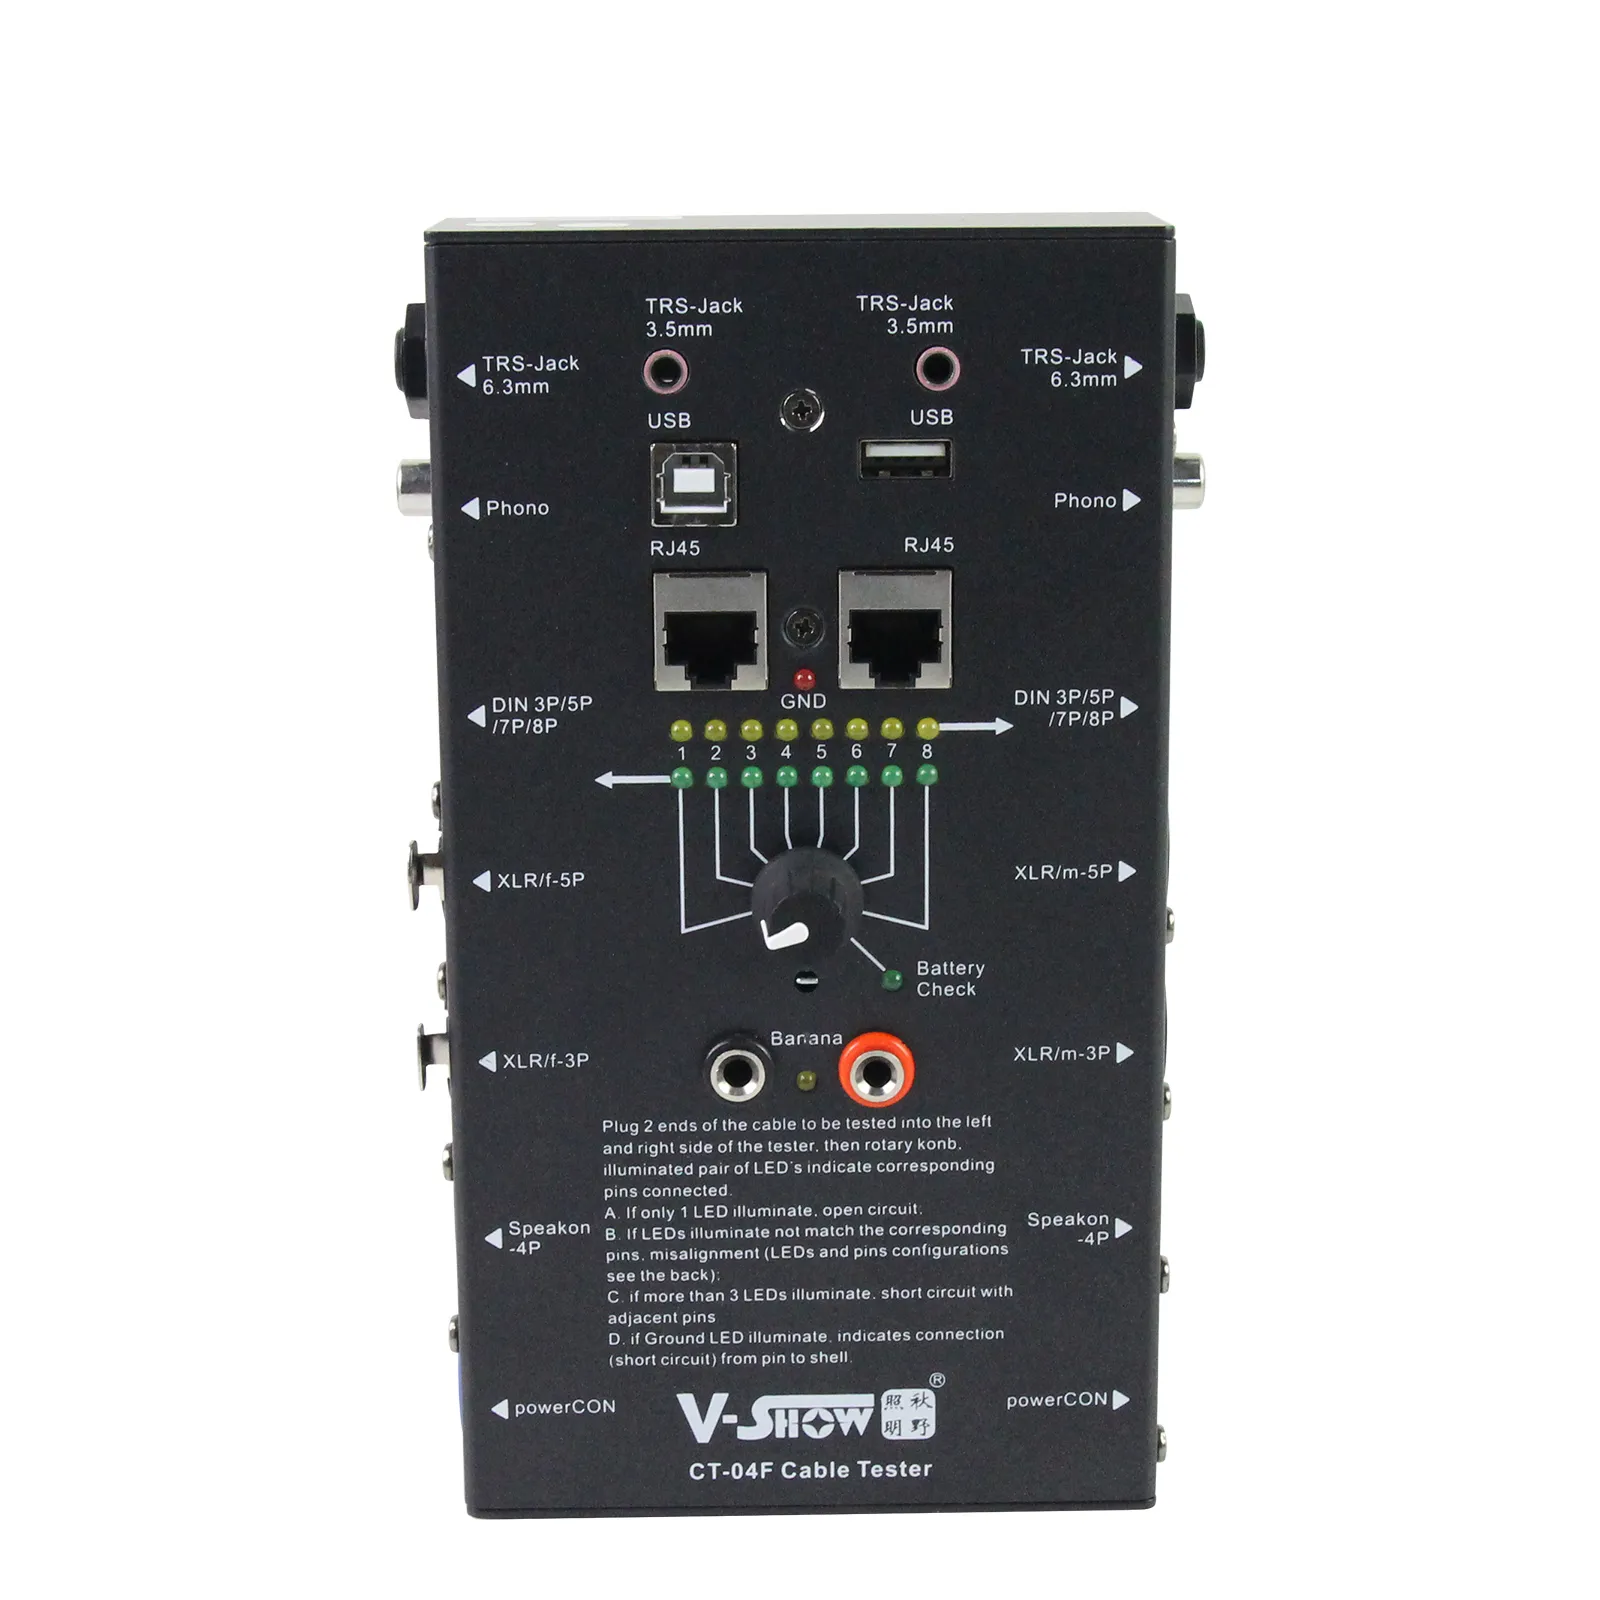 CT-04F Cable Tester